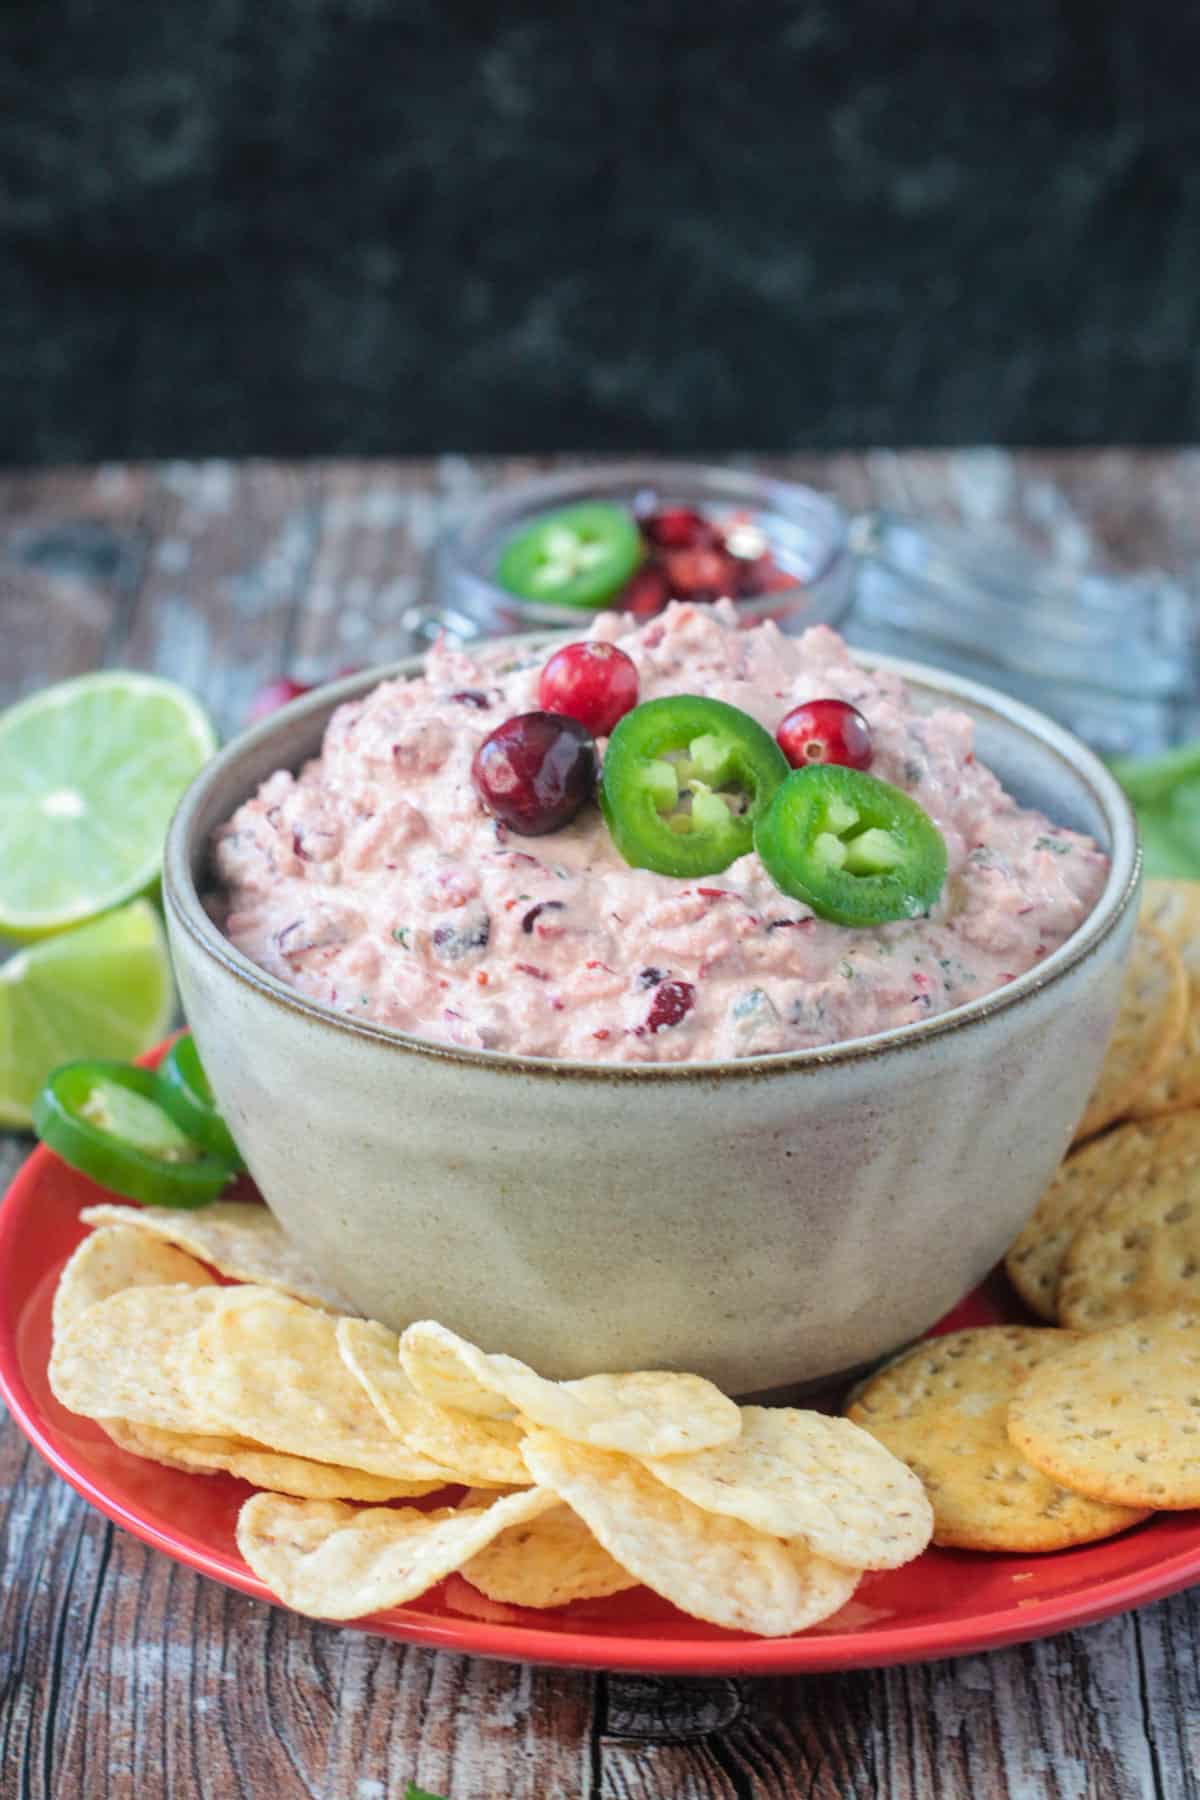 Gray ceramic bowl filled with dip on a red plate with chips.